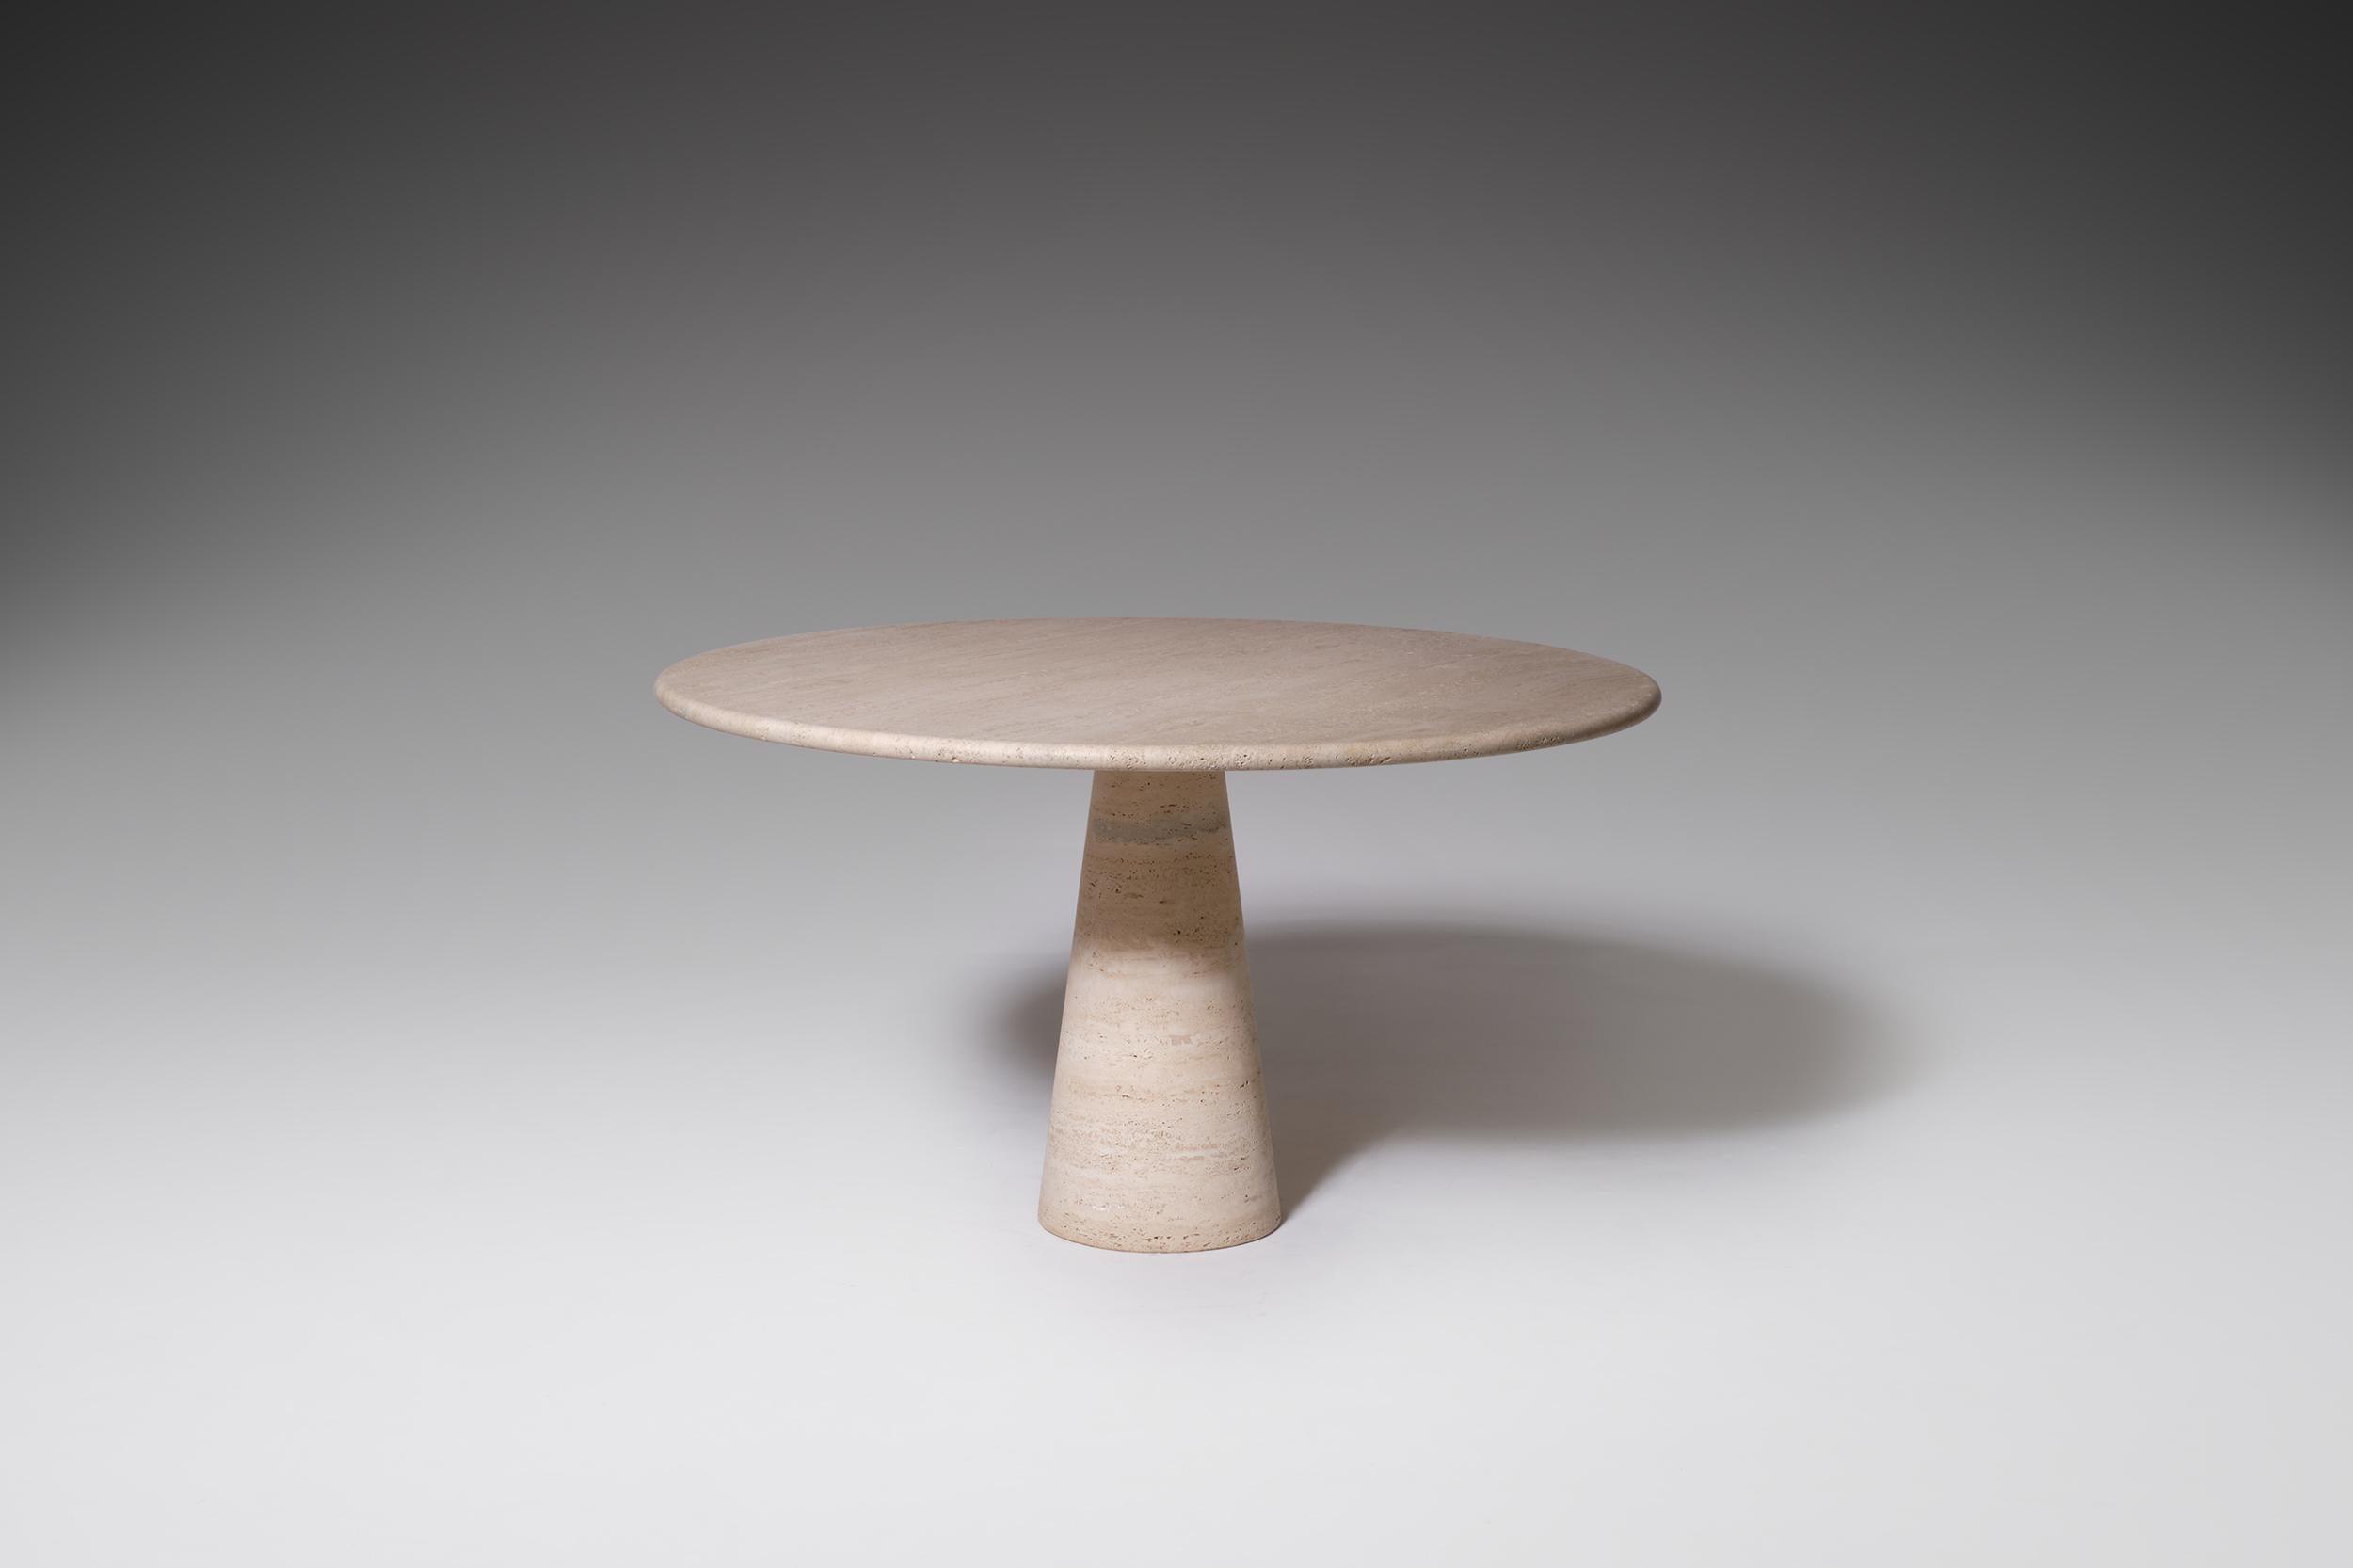 Mid-Century Modern travertine dining table by Angelo Mangiarotti for Skipper, Italy, 1970s.
The round table top is perfectly balanced and rests elegantly on an almost sculptural shaped diablo pedestal base, resulting in a near floating appearance.